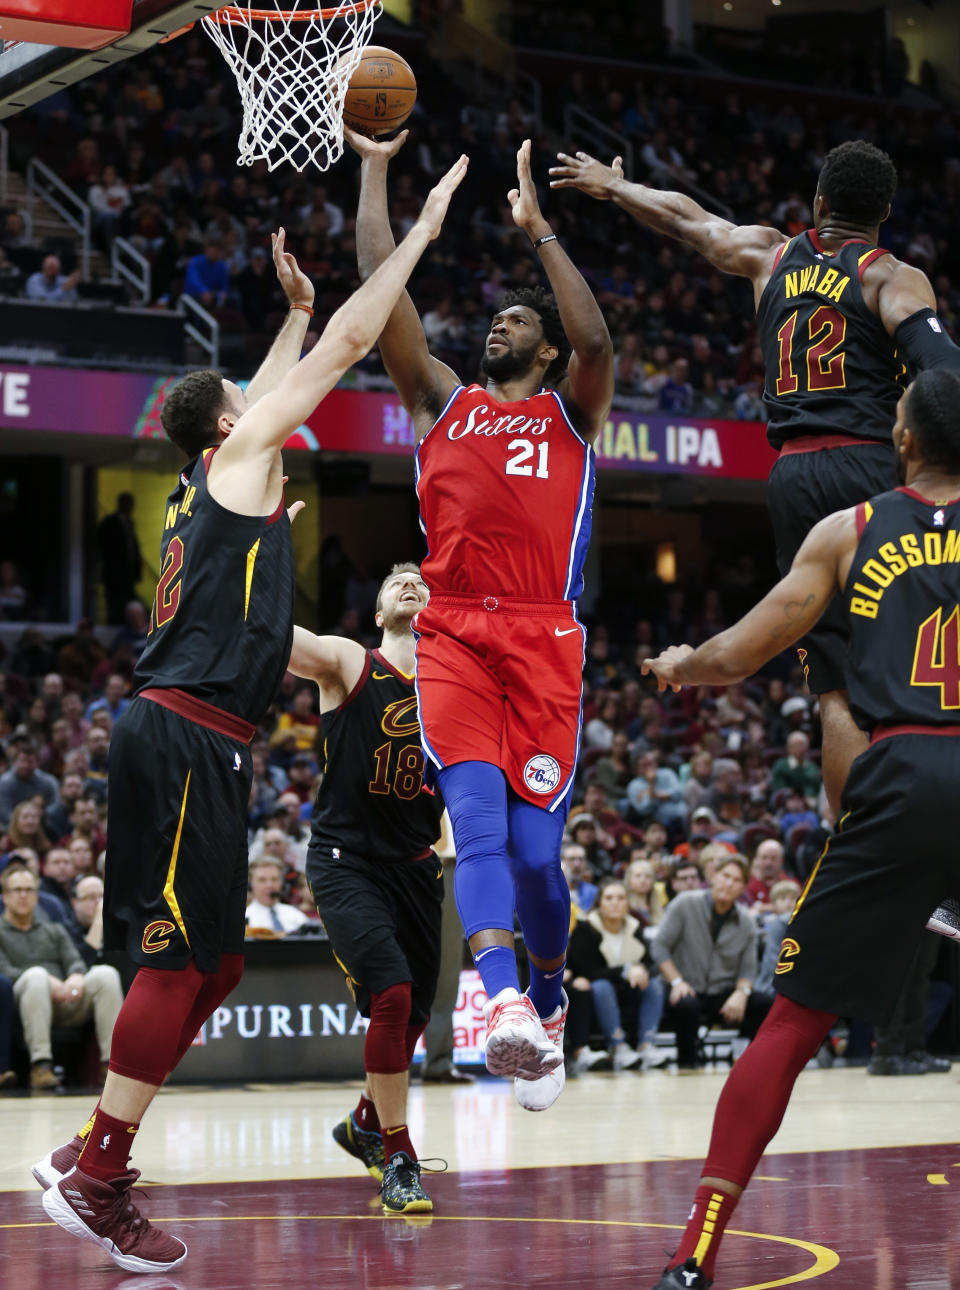 Philadelphia 76ers' Joel Embiid (21), from Cameroon, shoots against Cleveland Cavaliers' Larry Nance Jr. (22), David Nwaba (12), and Jaron Blossomgame (4) during the second half of an NBA basketball game Sunday, Dec. 16, 2018, in Cleveland. (AP Photo/Ron Schwane)